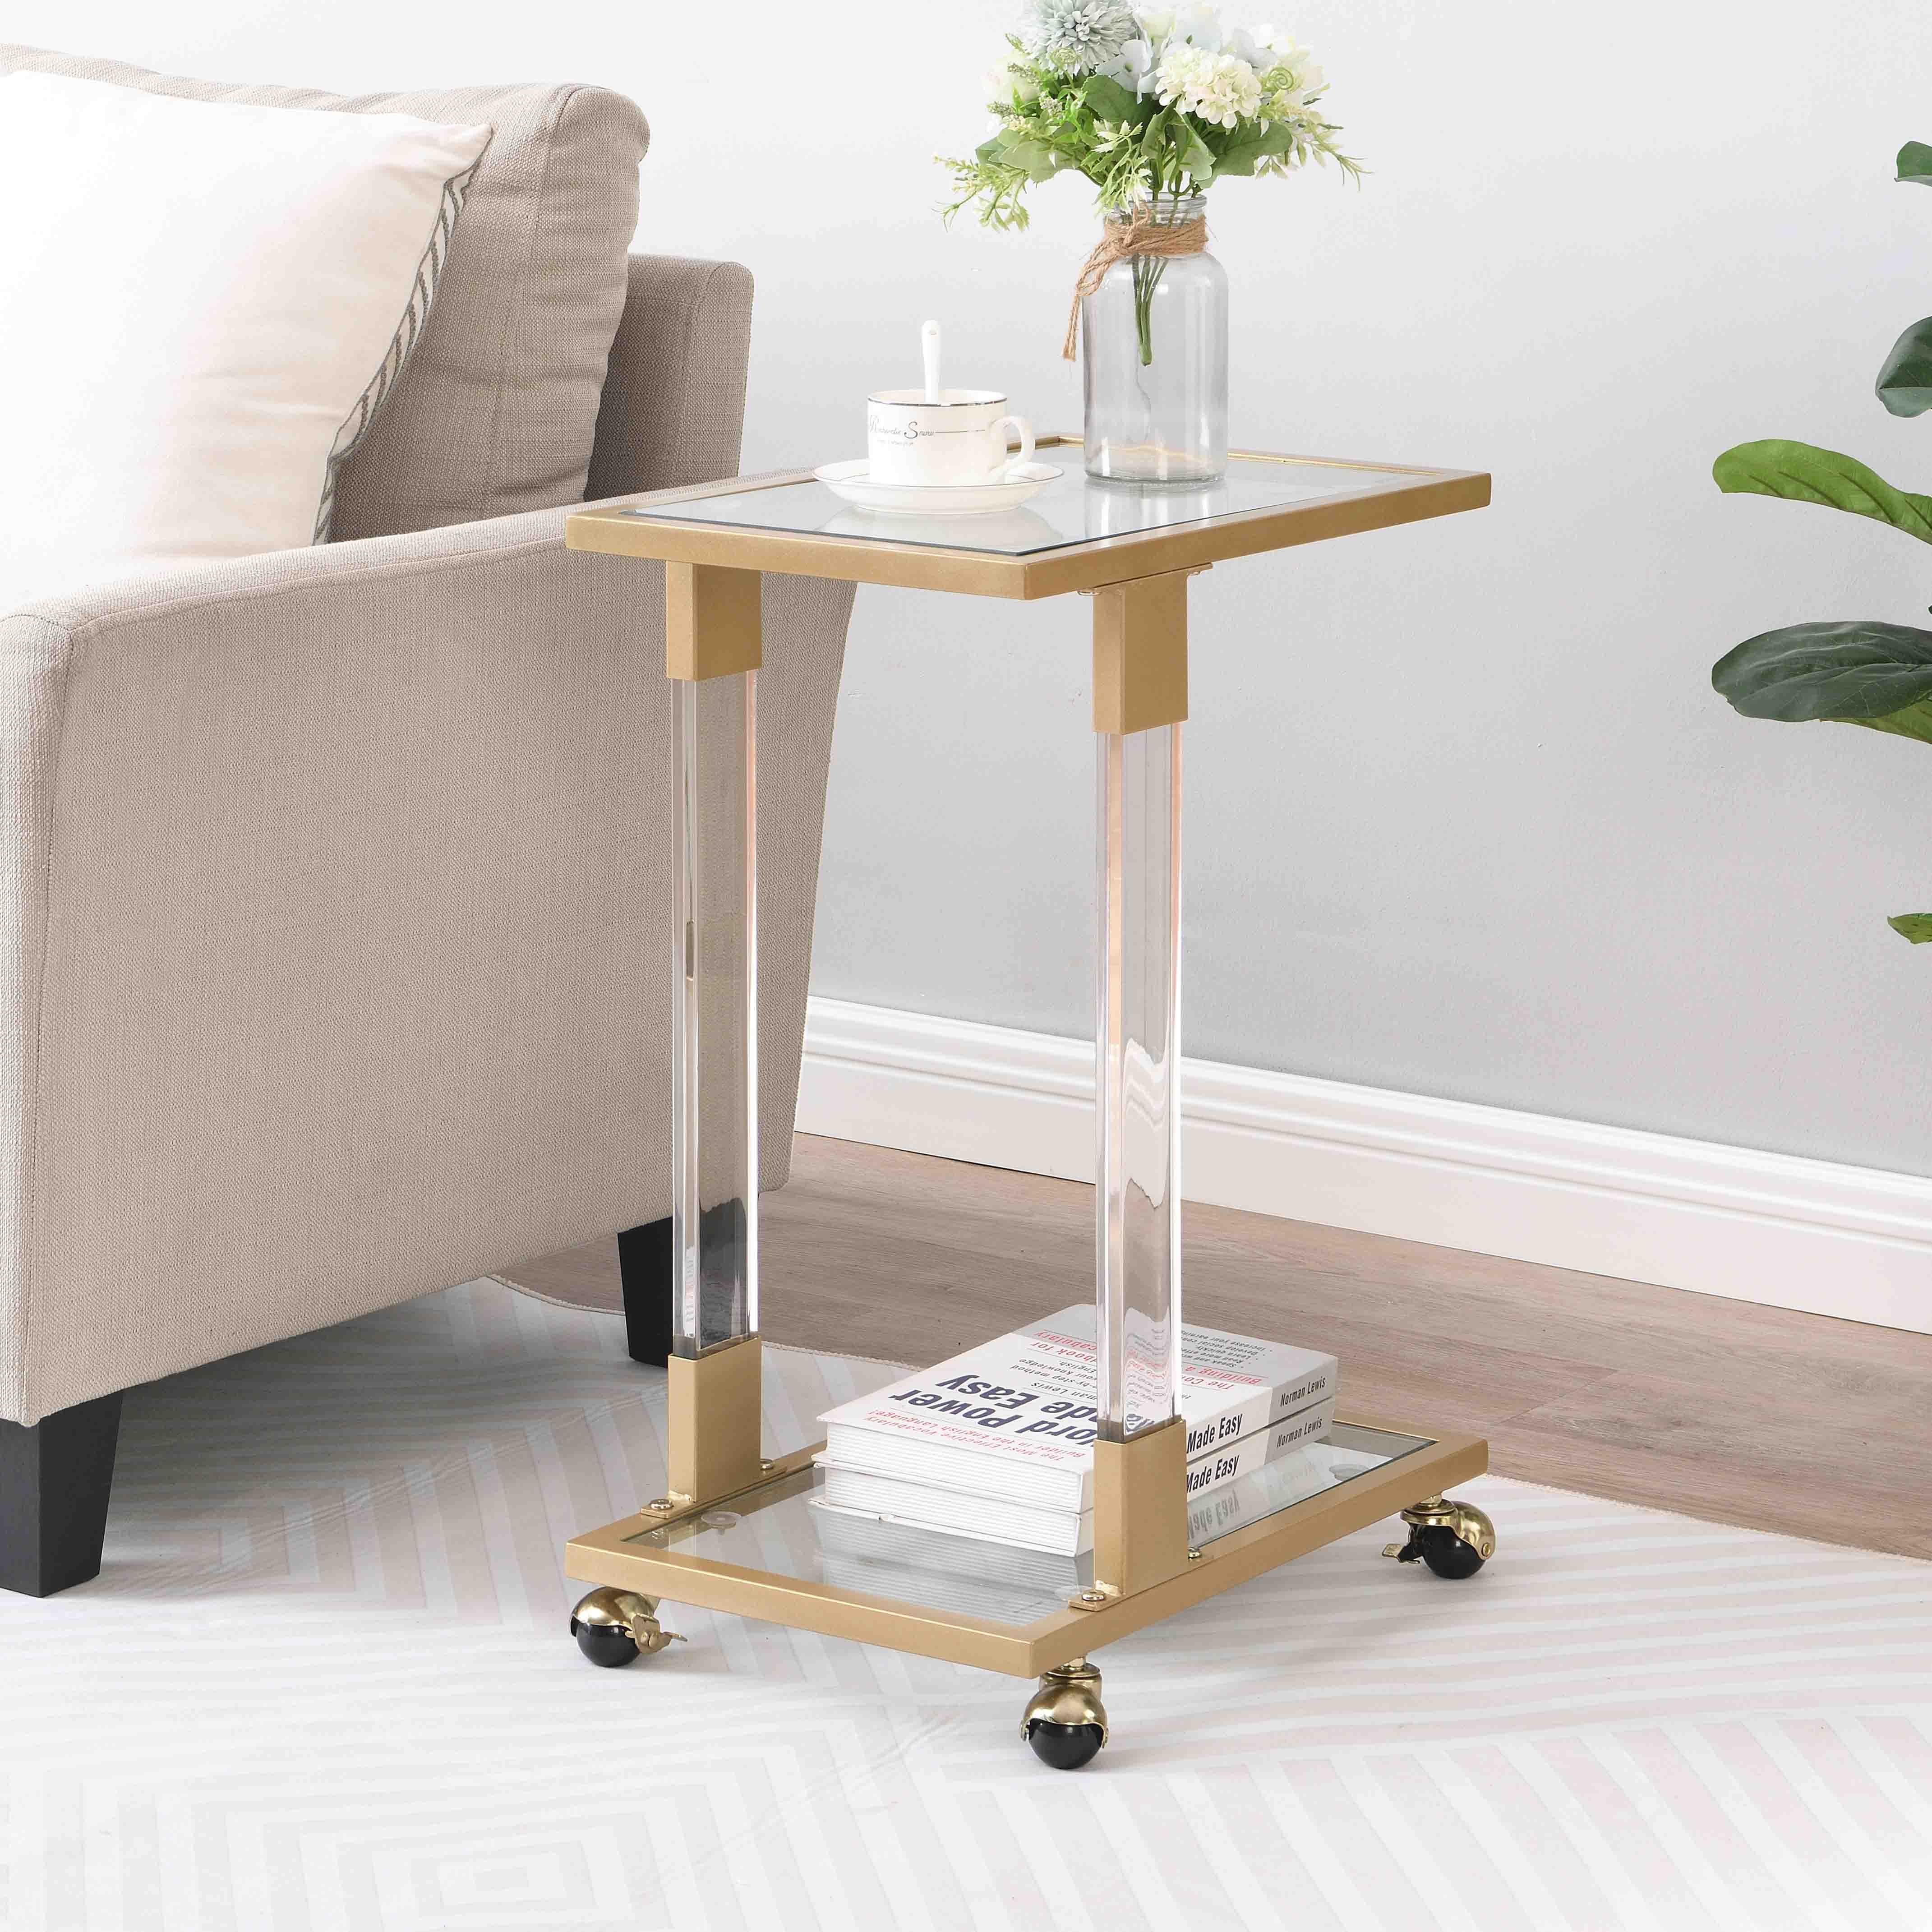 Golden Side Table, Acrylic Sofa Table, Glass Top C Shape Square Table With Metal Base For Living Room, Balcony Home And Office